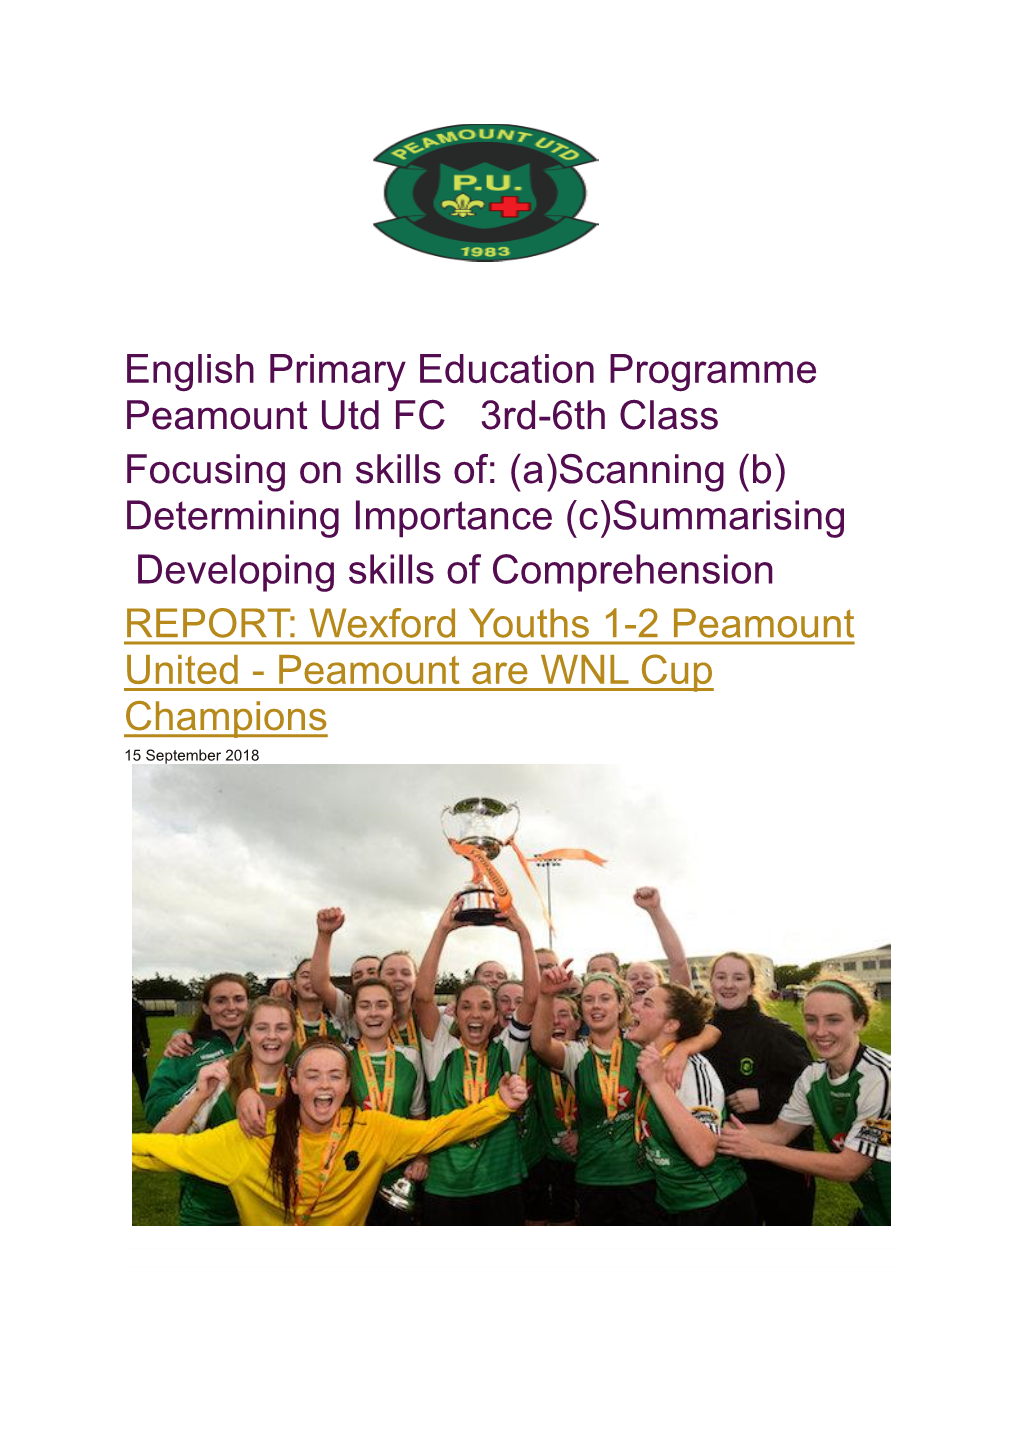 English Primary Education Programme Peamount Utd FC 3Rd-6Th Class Focusing on Skills Of: (A)Scanning (B) Determining Importan